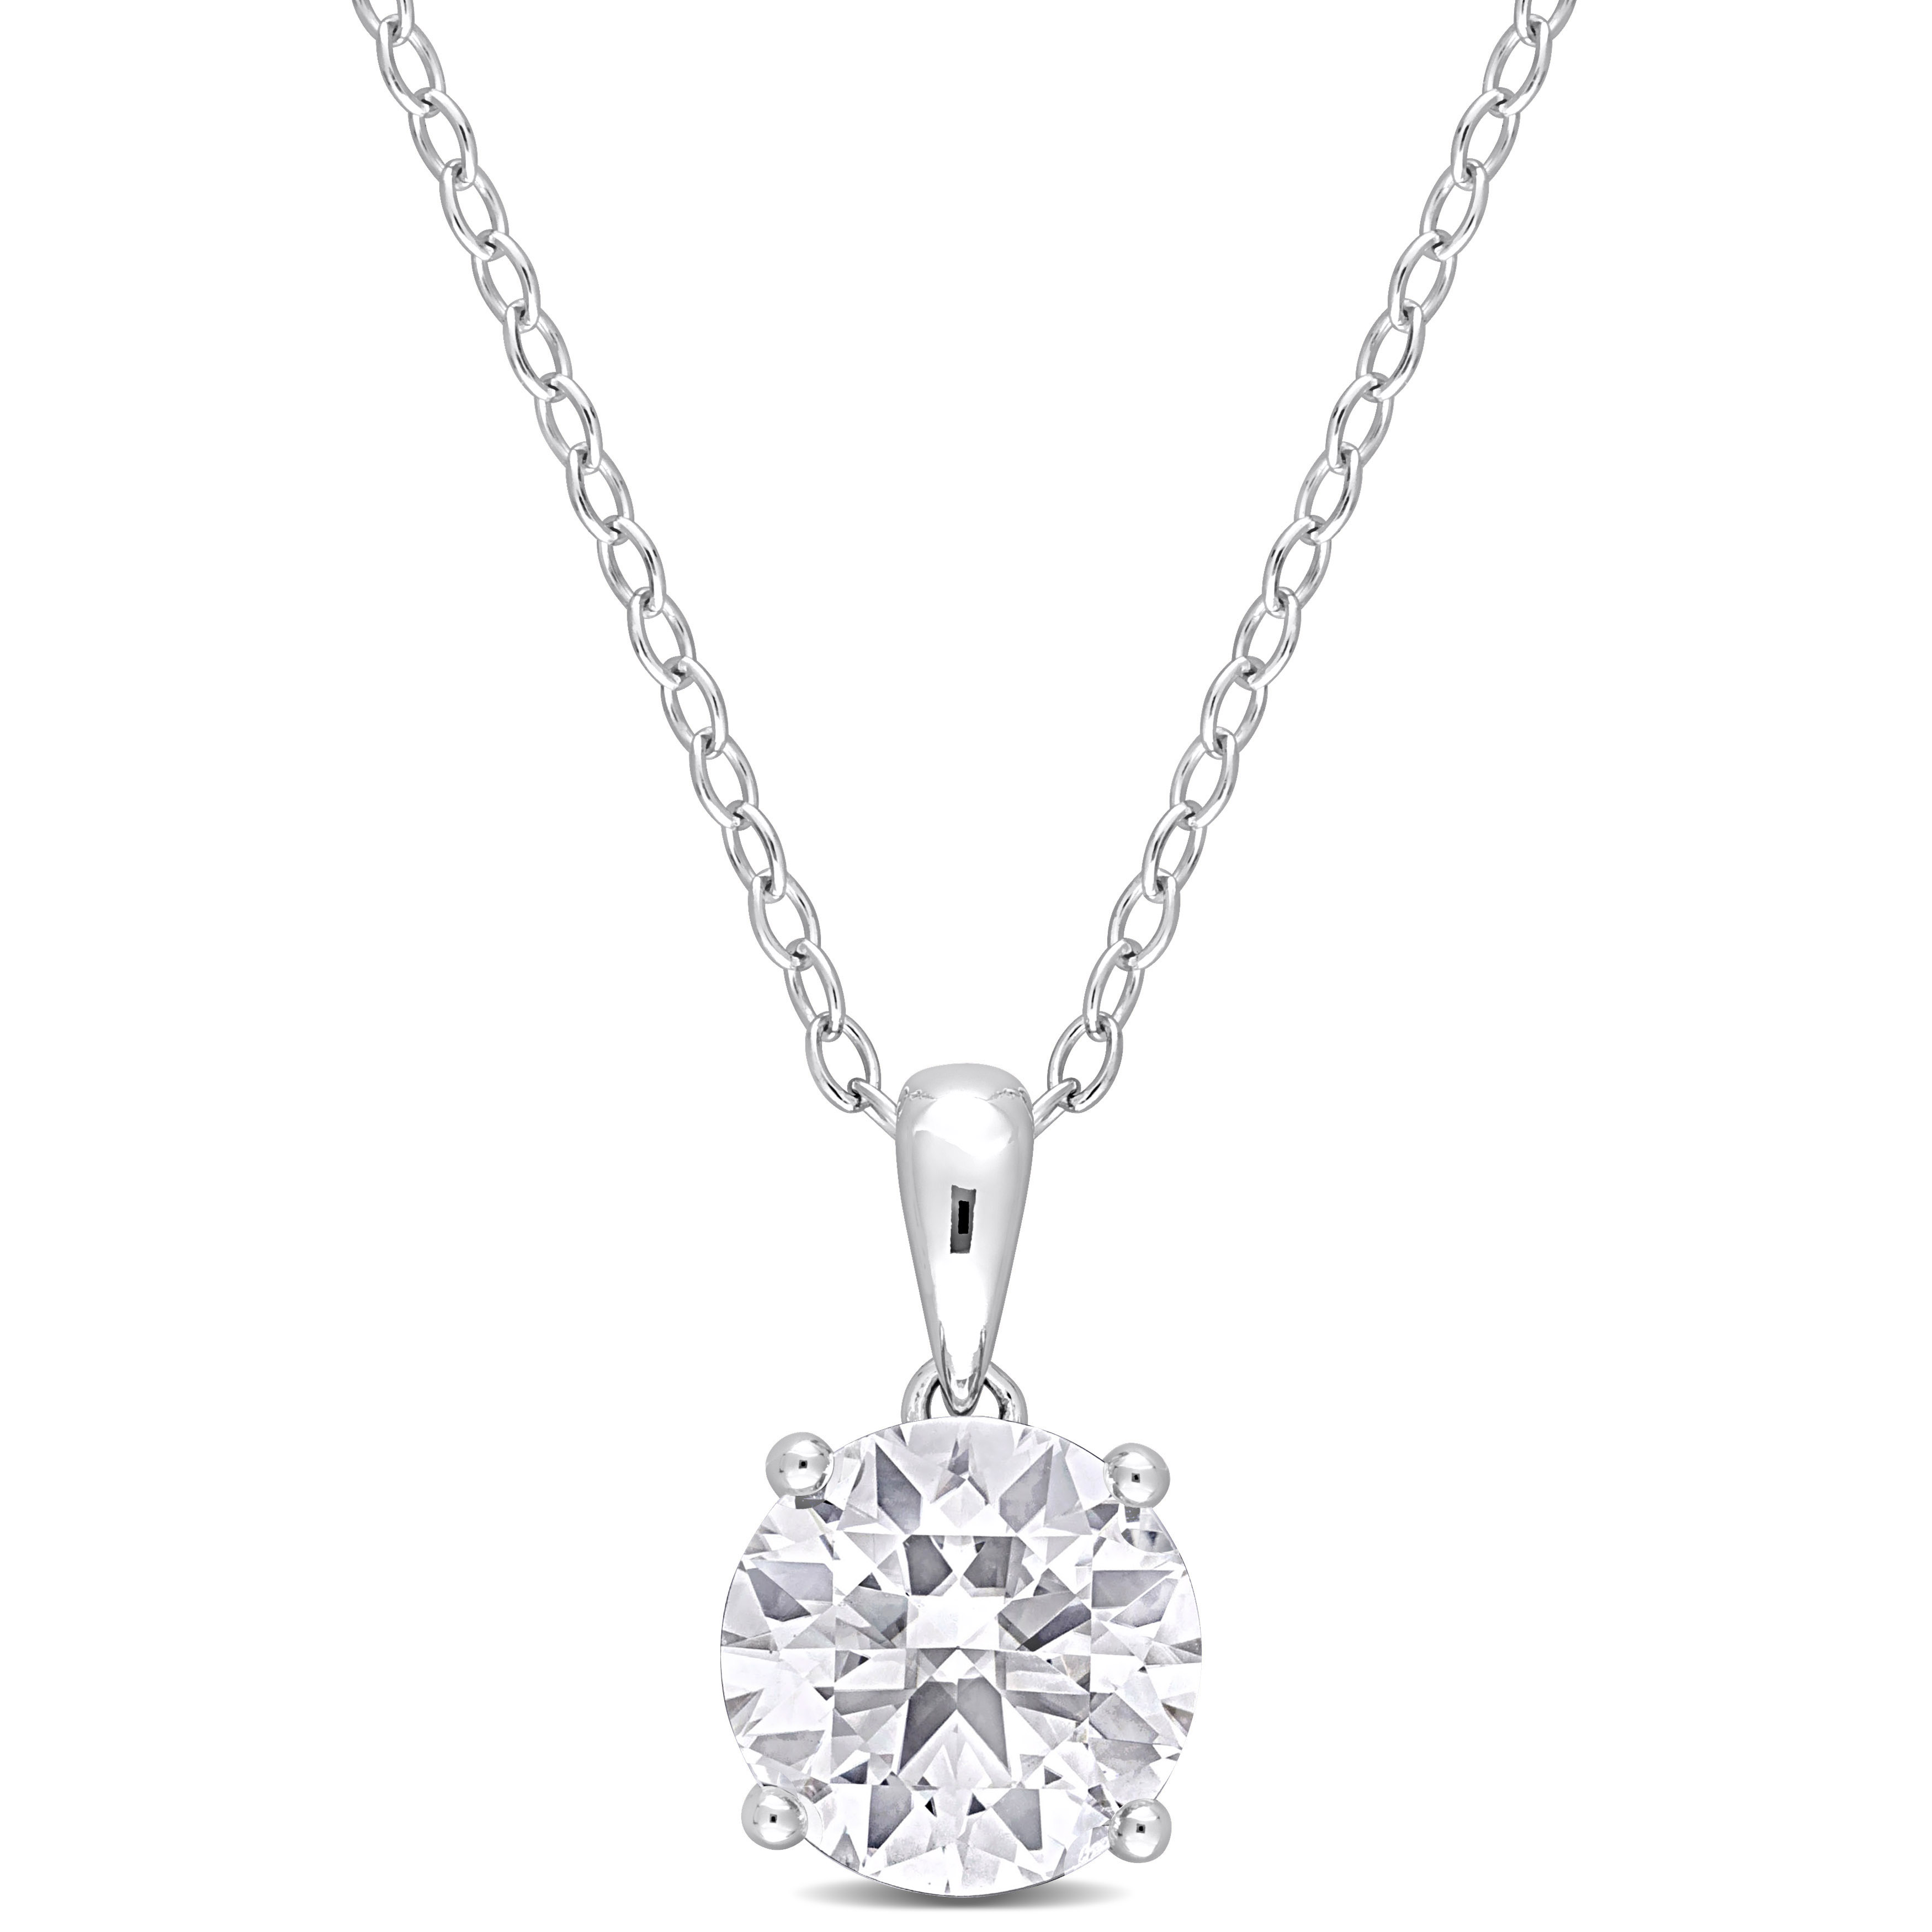 2 1/3 CT TGW White Topaz Solitaire Heart Design Pendant with Chain in Sterling Silver - 18 in.